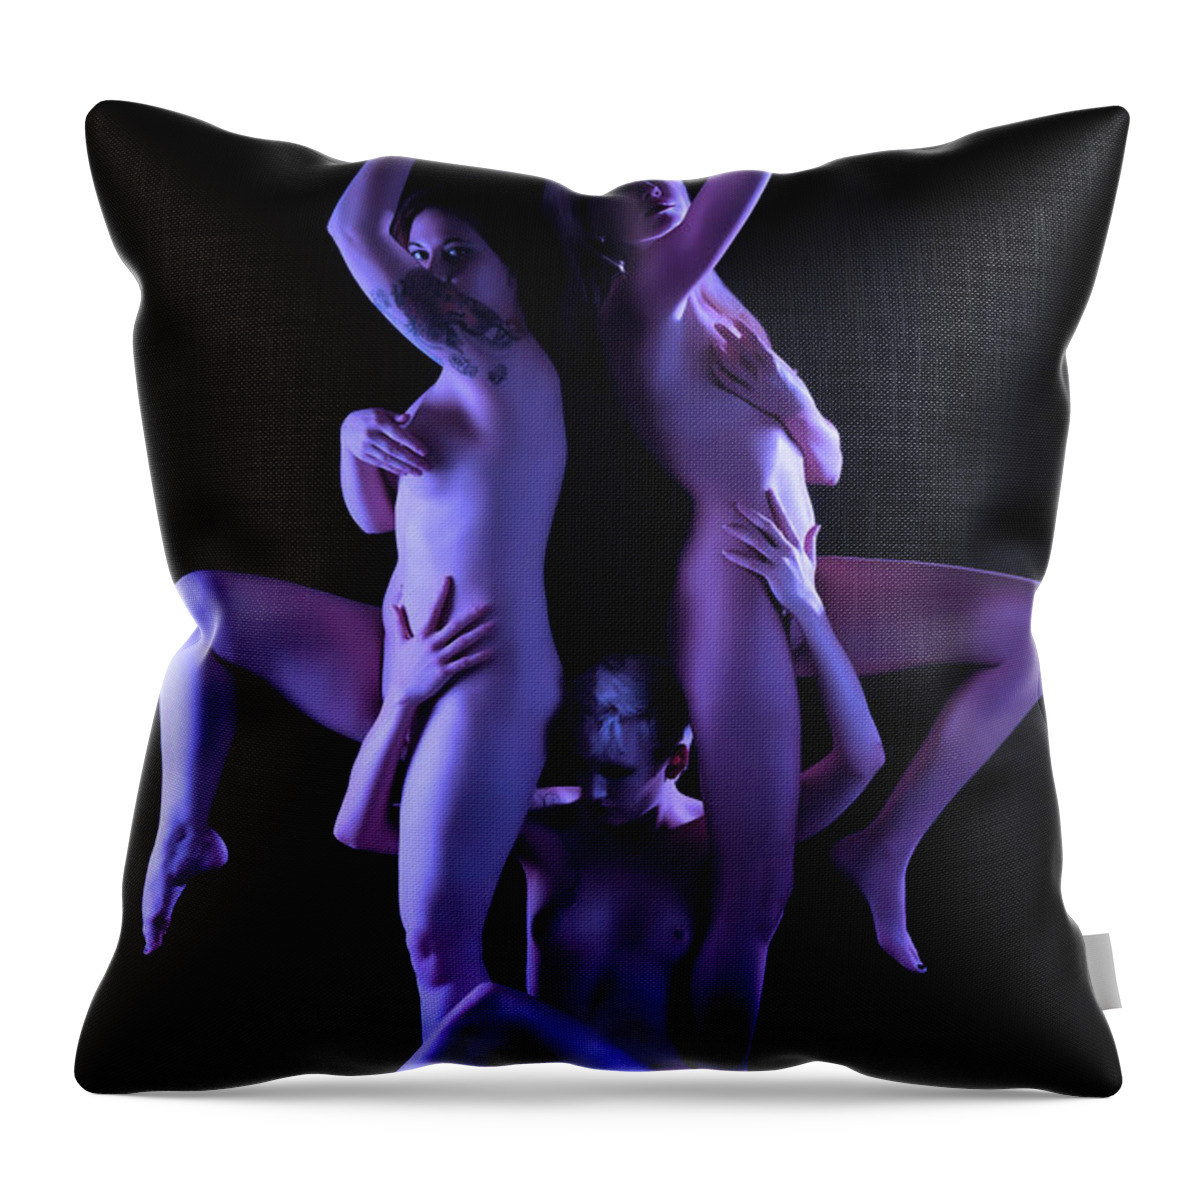 Artistic Photographs Throw Pillow featuring the photograph Three Sisters by Robert WK Clark